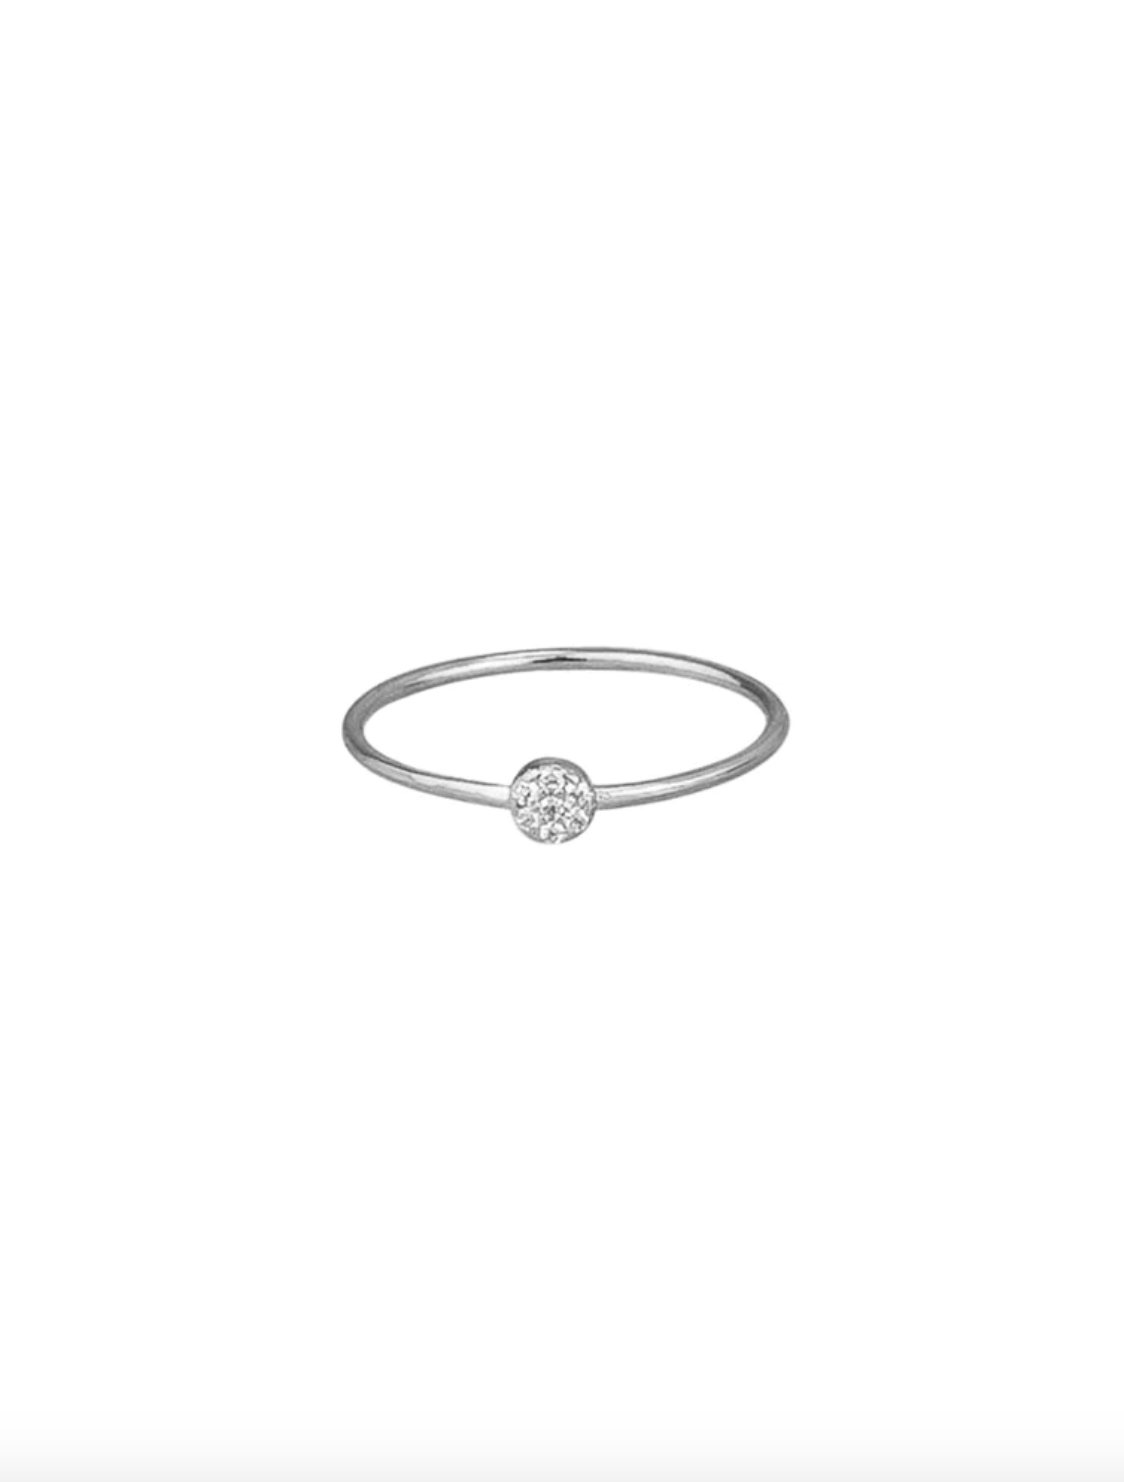 Petite Circle Ring - Silver | Accessories | Accessories, brand-JOLIE AND DEEN, colour-metallic, Jewellery, mother, mothers, price-Under $50, Rings, Silver | Jolie and Deen